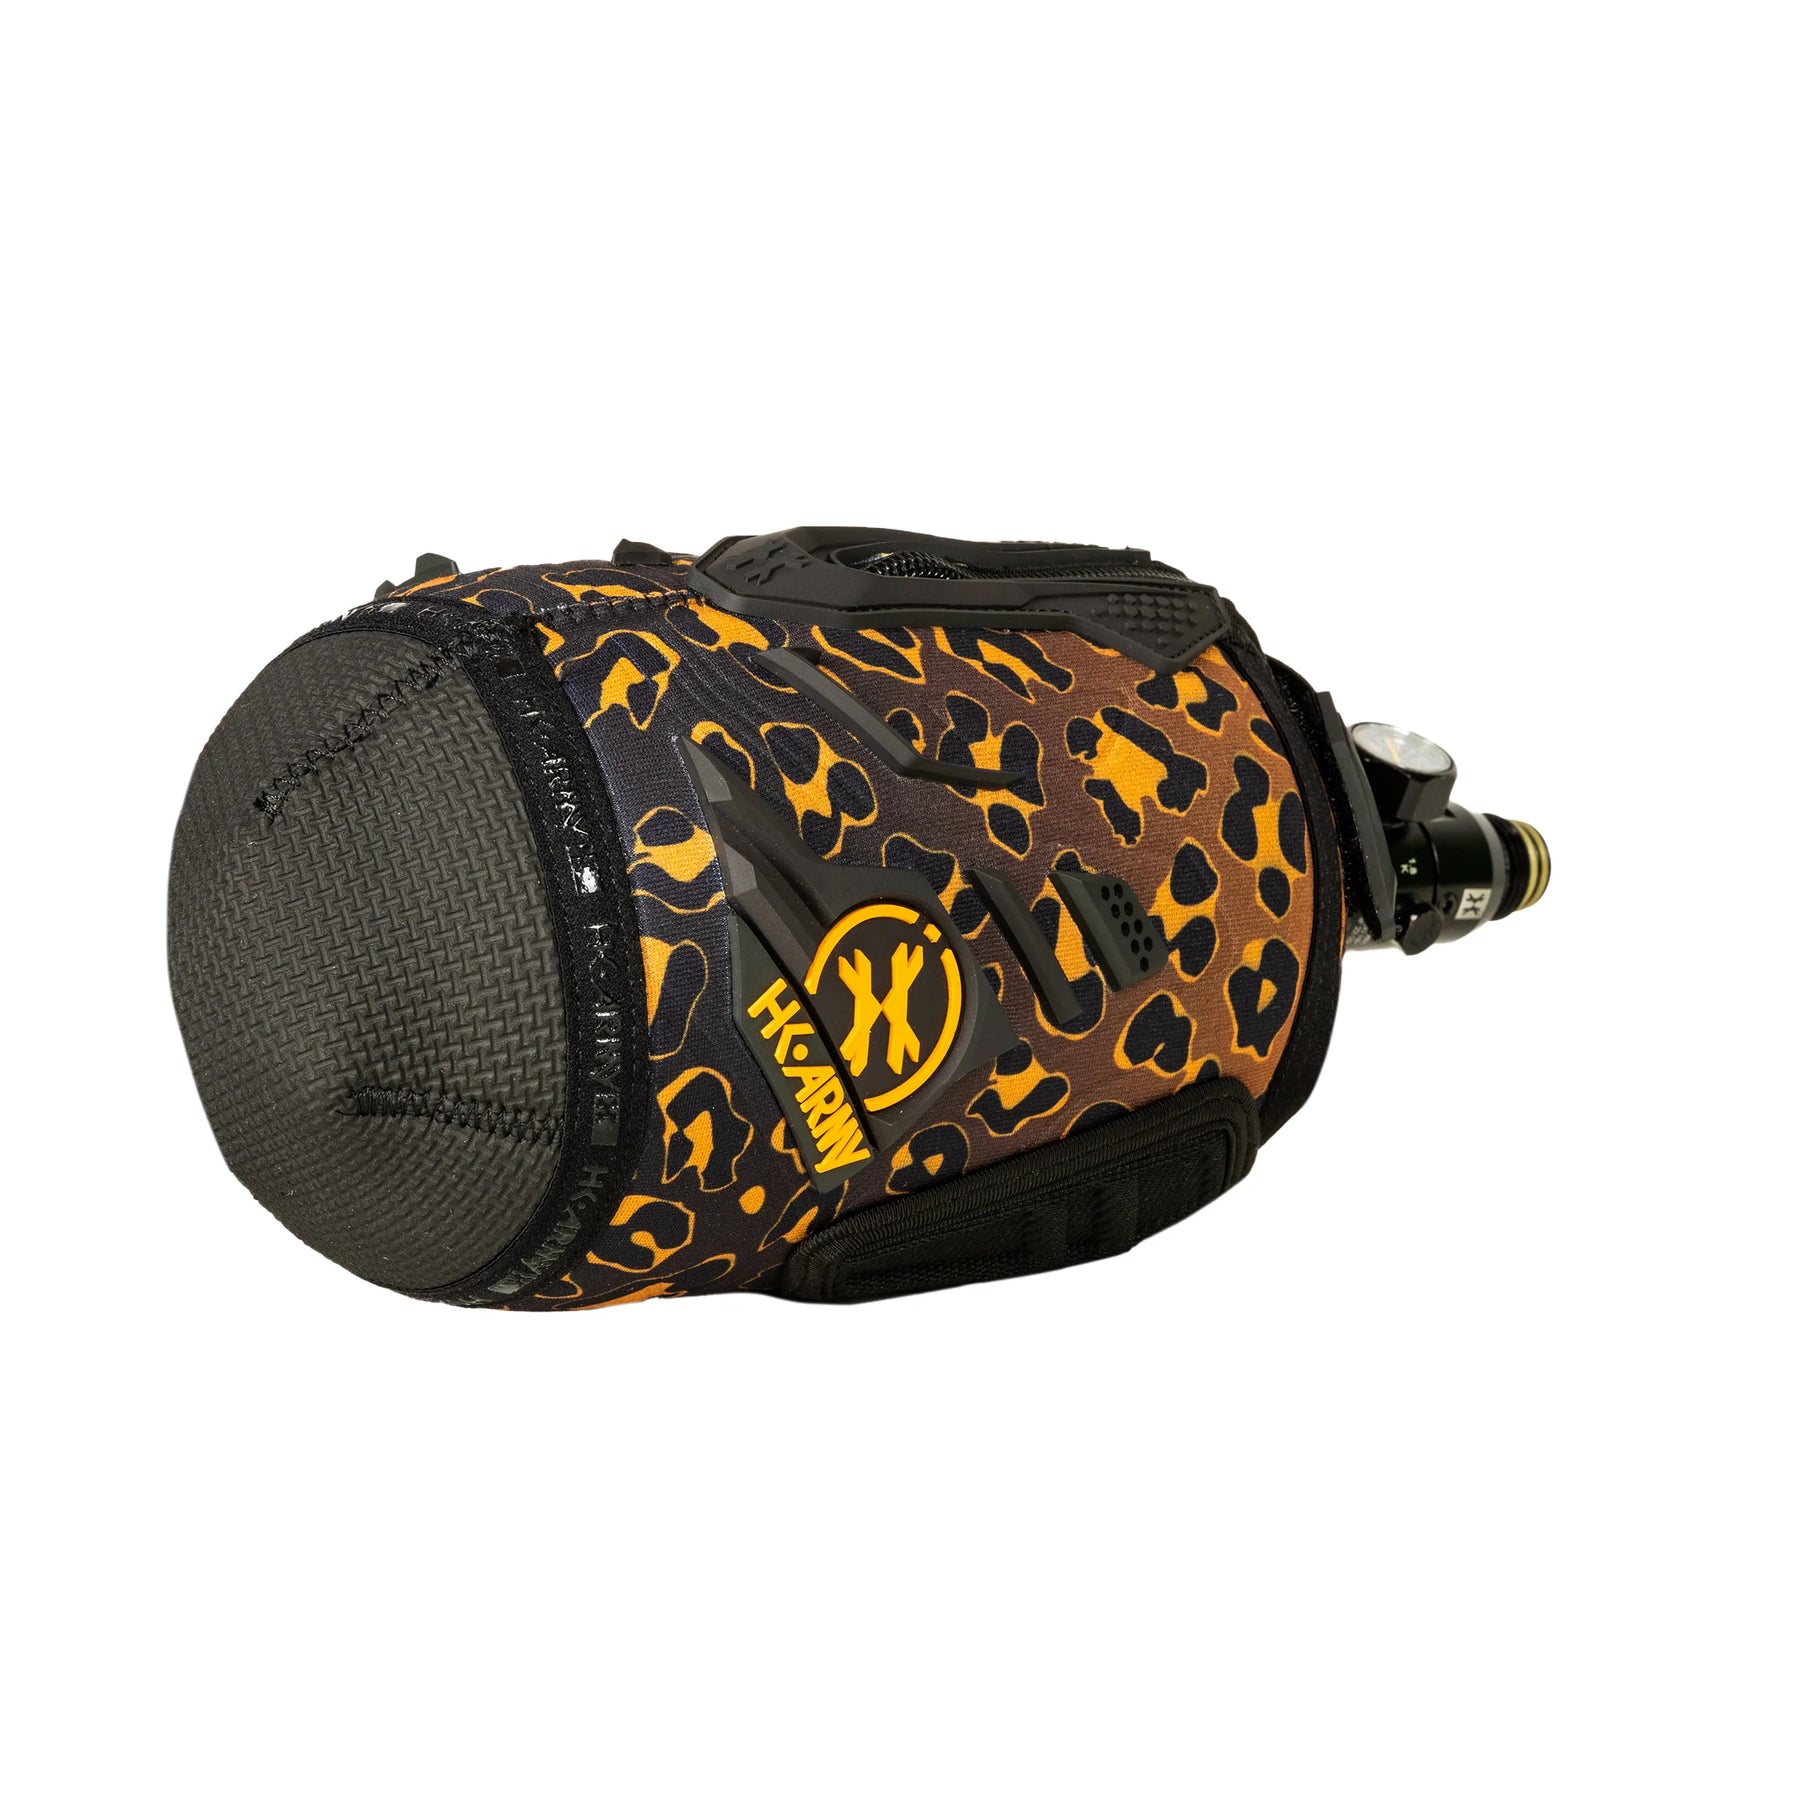 Paintball air tank cover / sleeve | hardline armored - Color: Leopard king